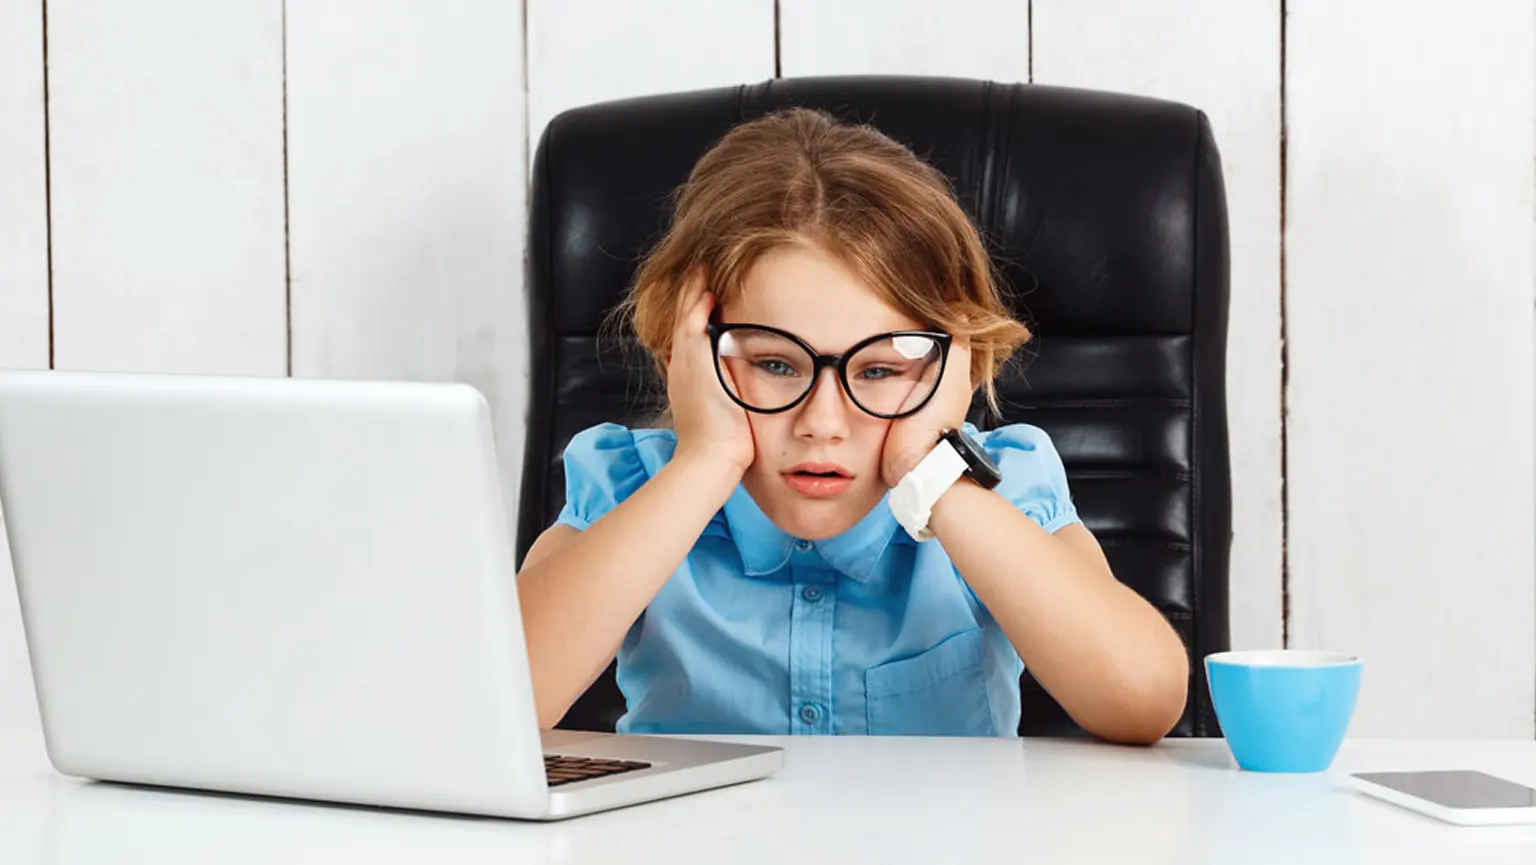 Tips for protecting students’ eyes from digital eye strain